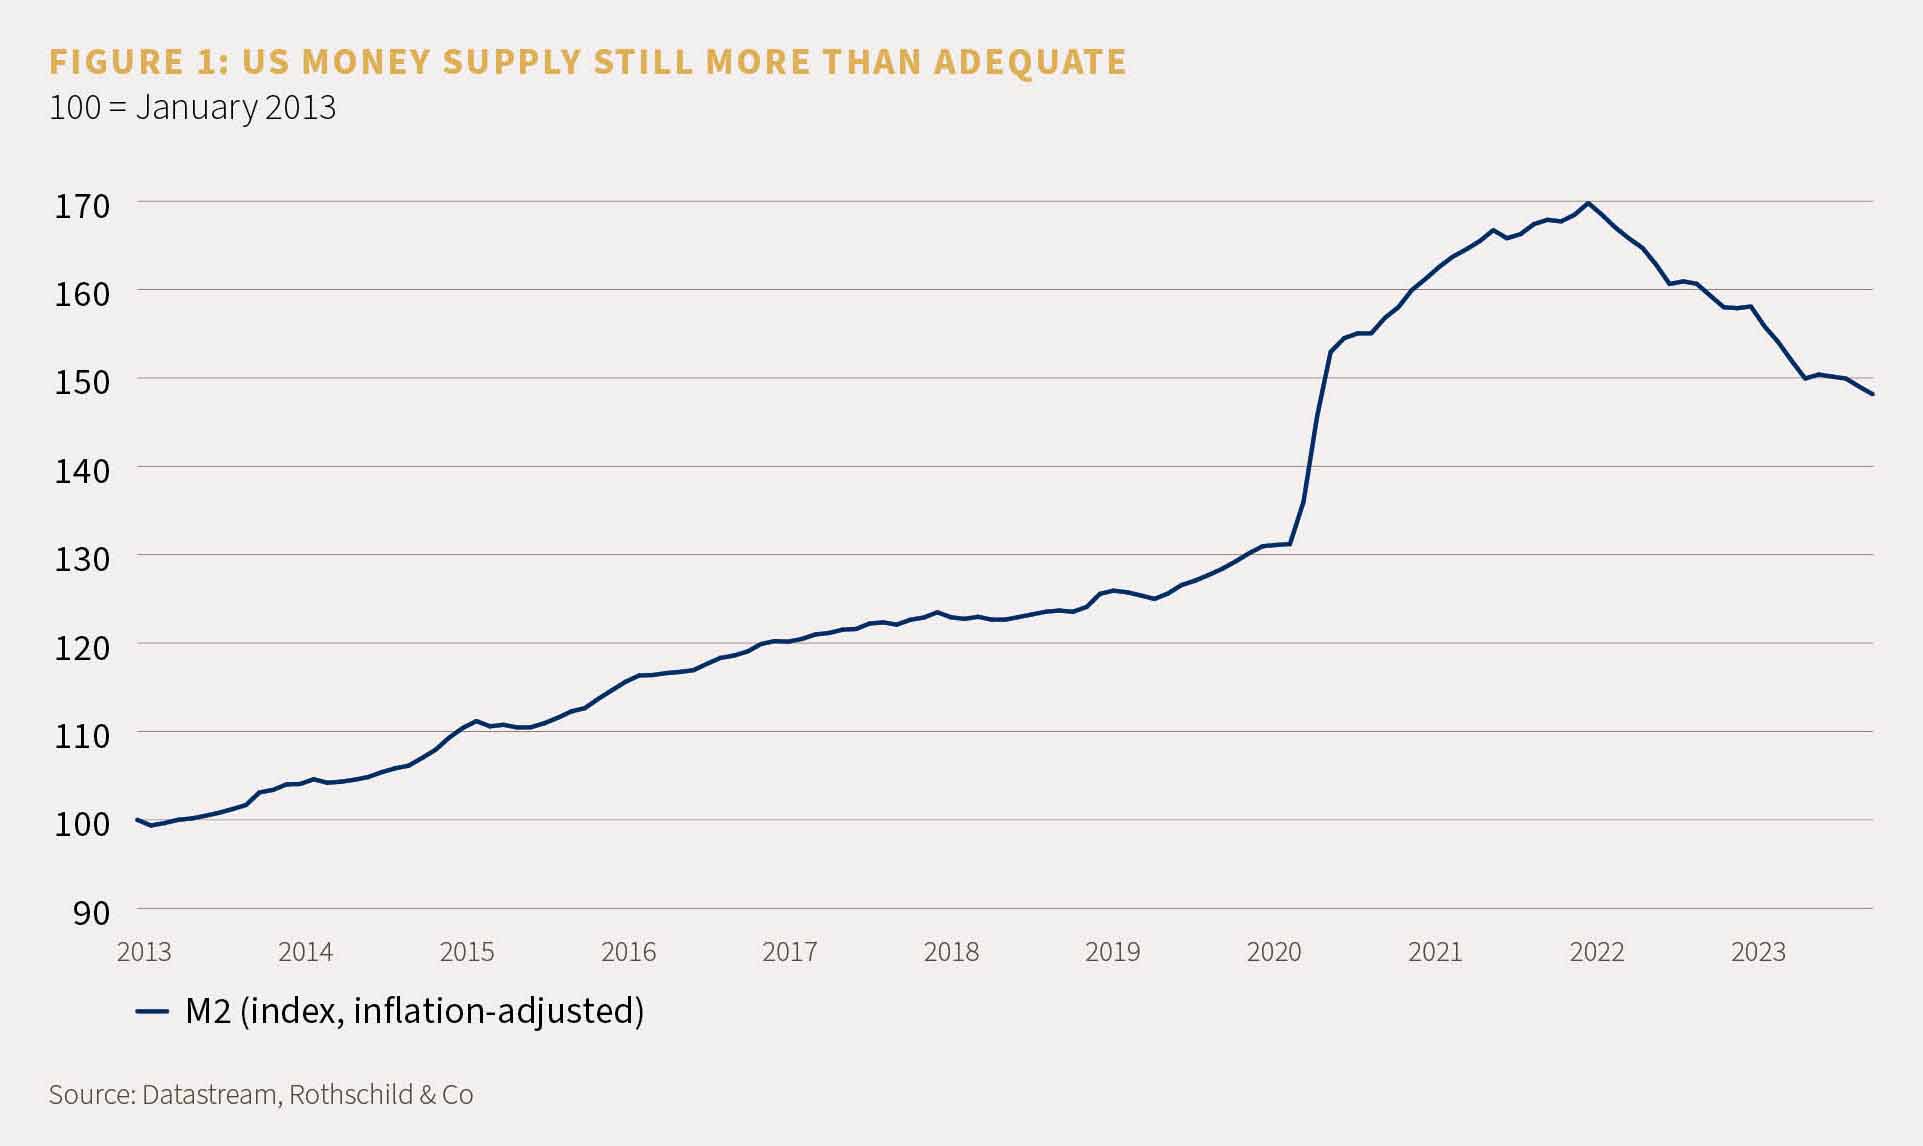 A chart to show that the US money supply is still more than adequate